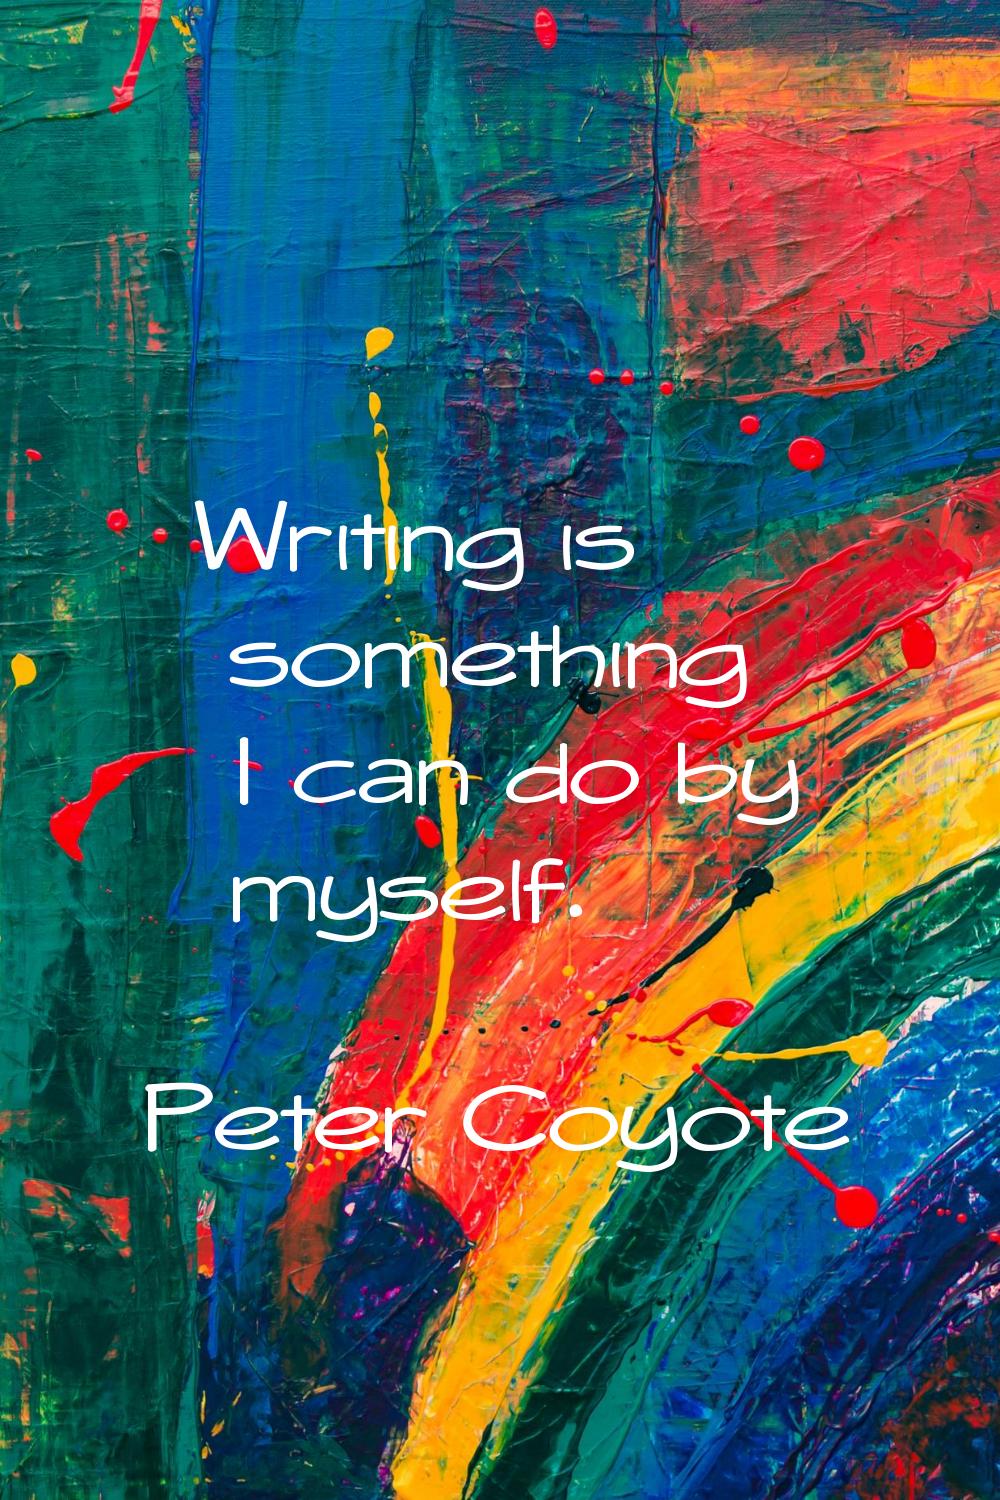 Writing is something I can do by myself.